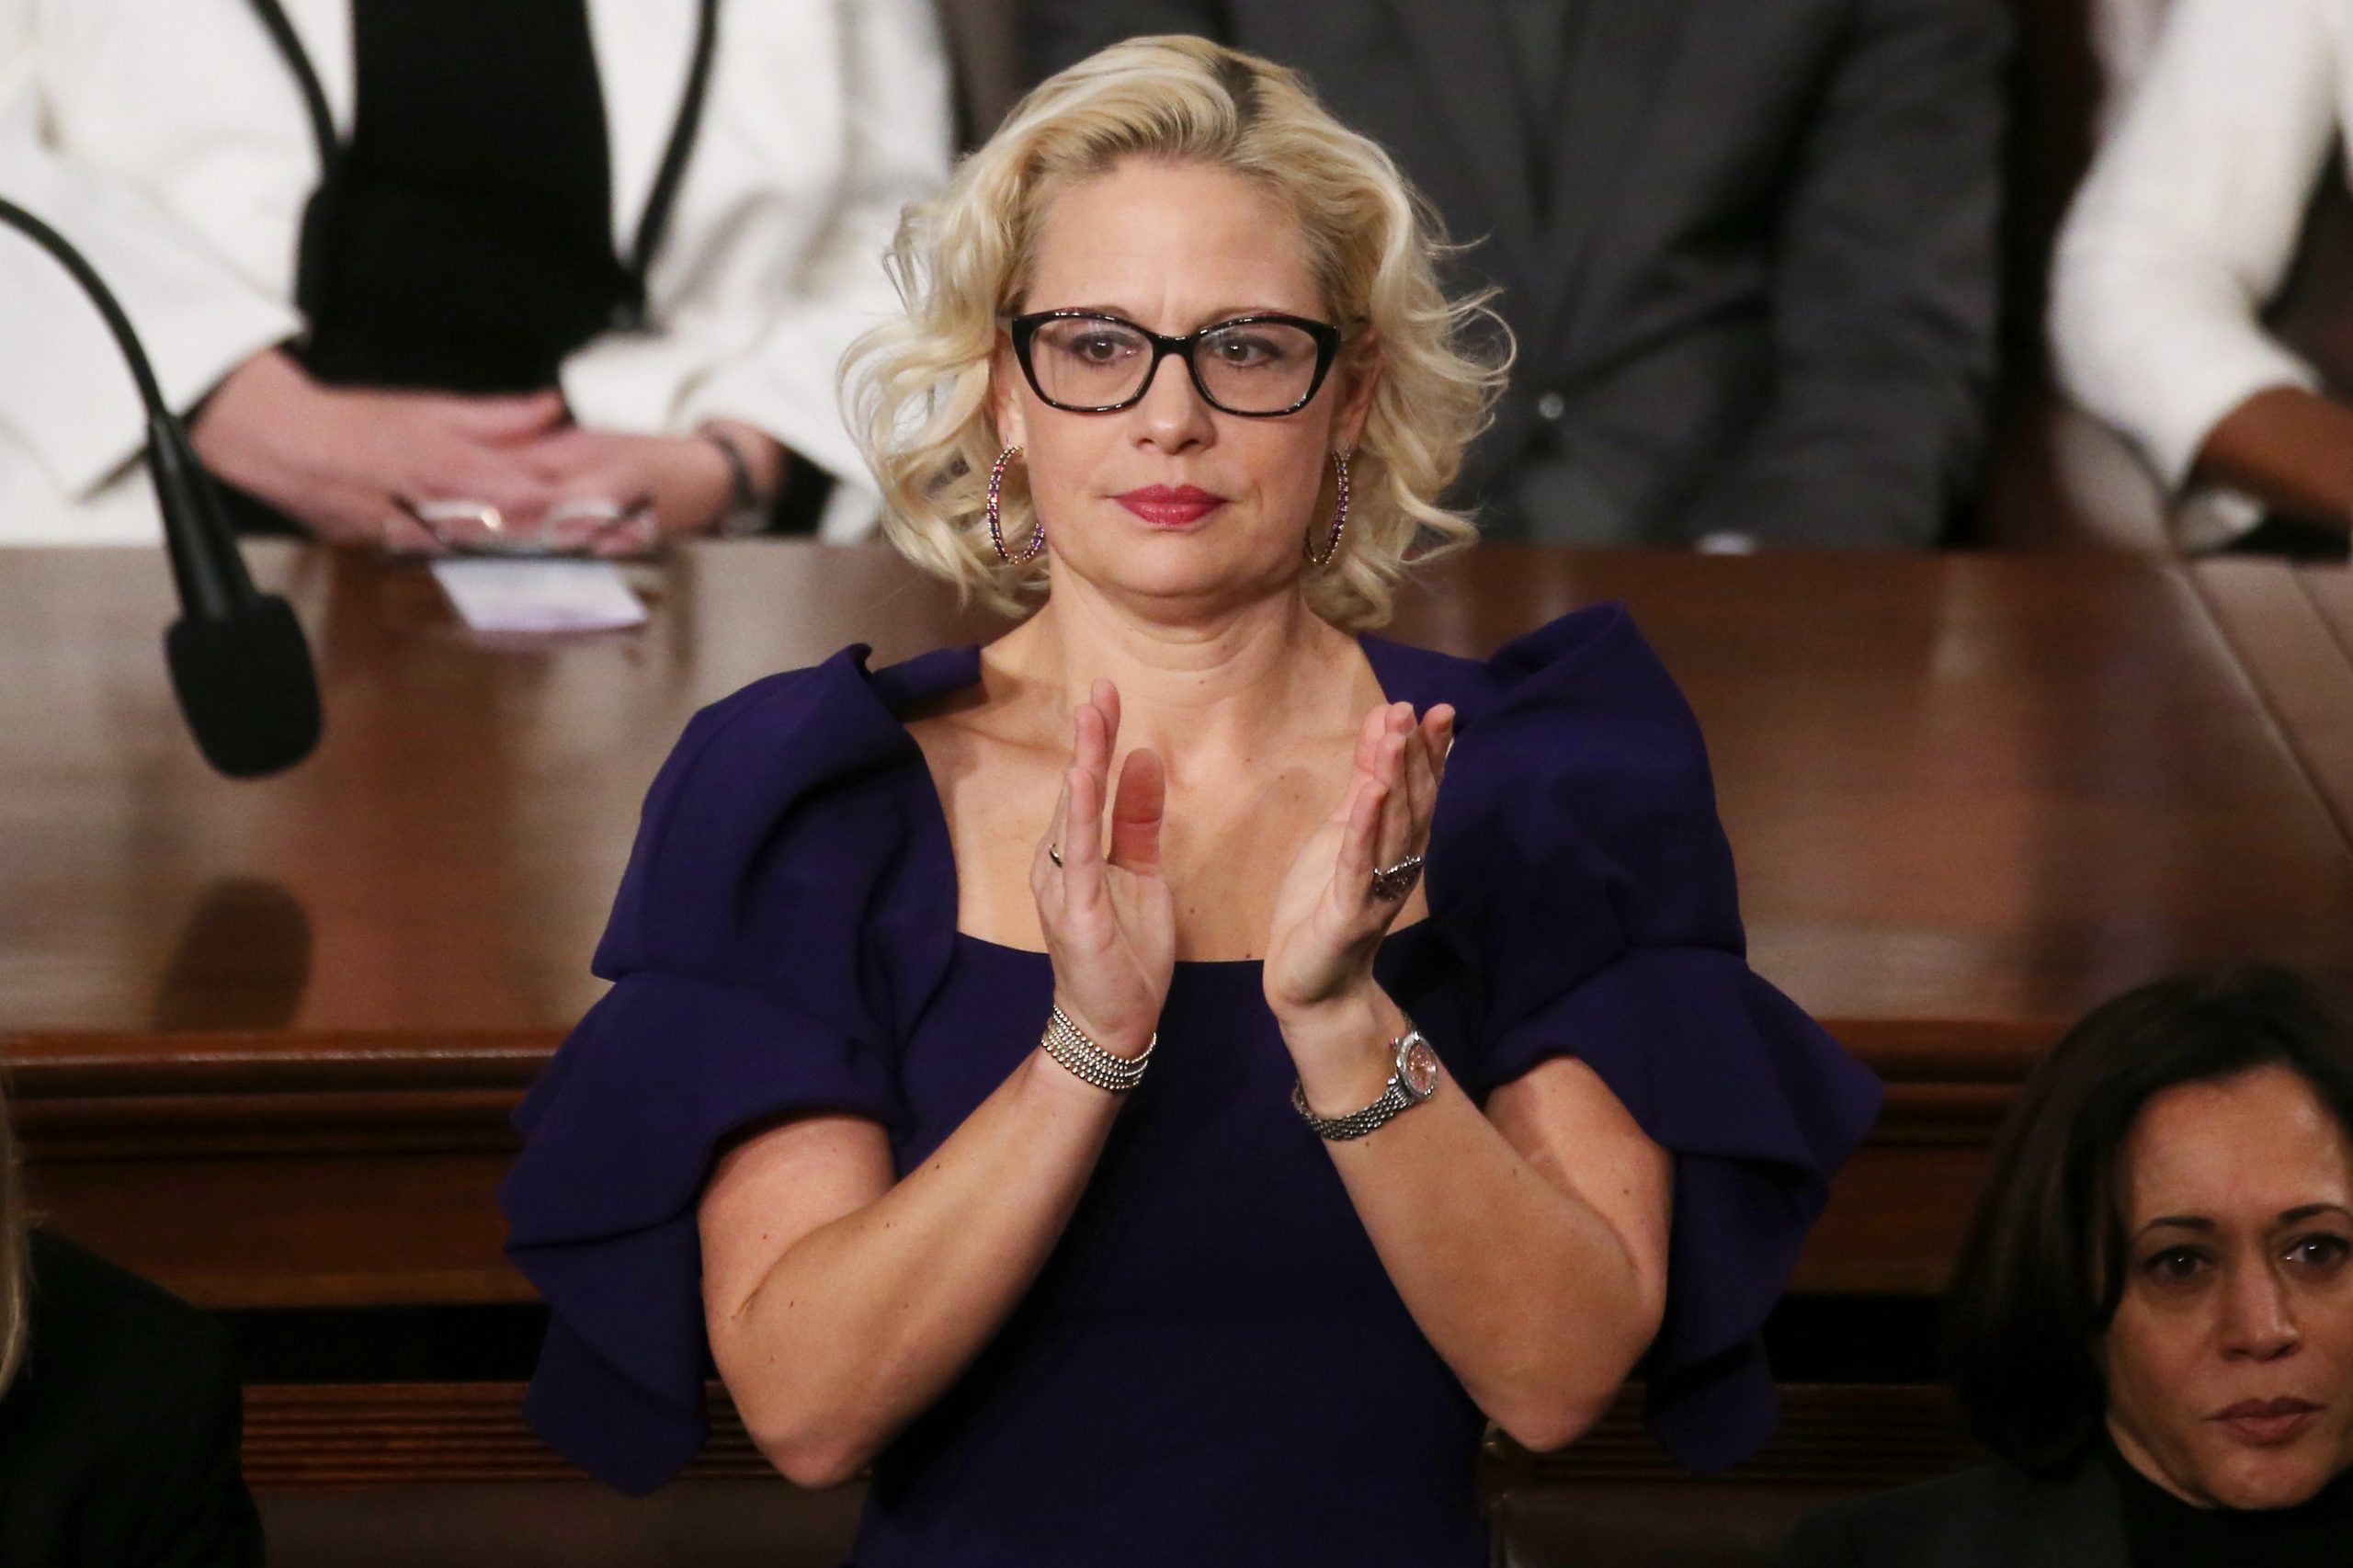 Kyrsten Sinema Called January 6 Commission ‘Critical,’ But Missed Vote